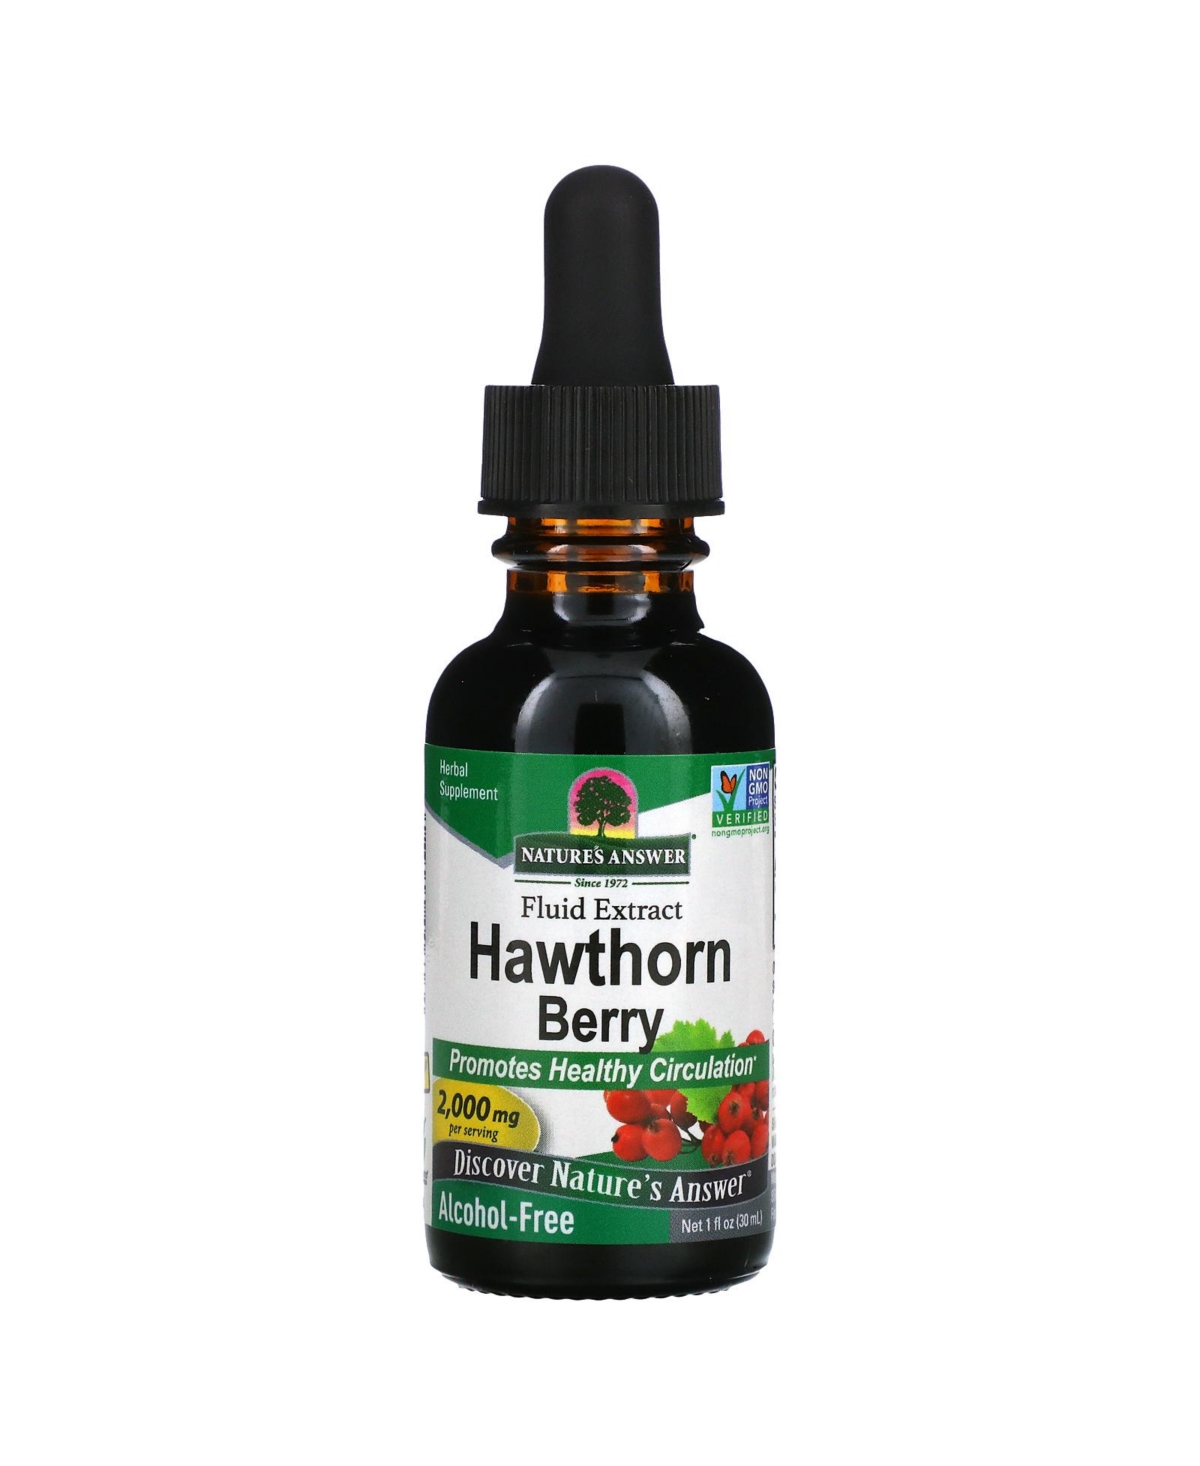 Hawthorn Berry Fluid Extract Alcohol-Free 2 000 mg - 1 fl oz (30 ml) - Assorted Pre-pack (See Table